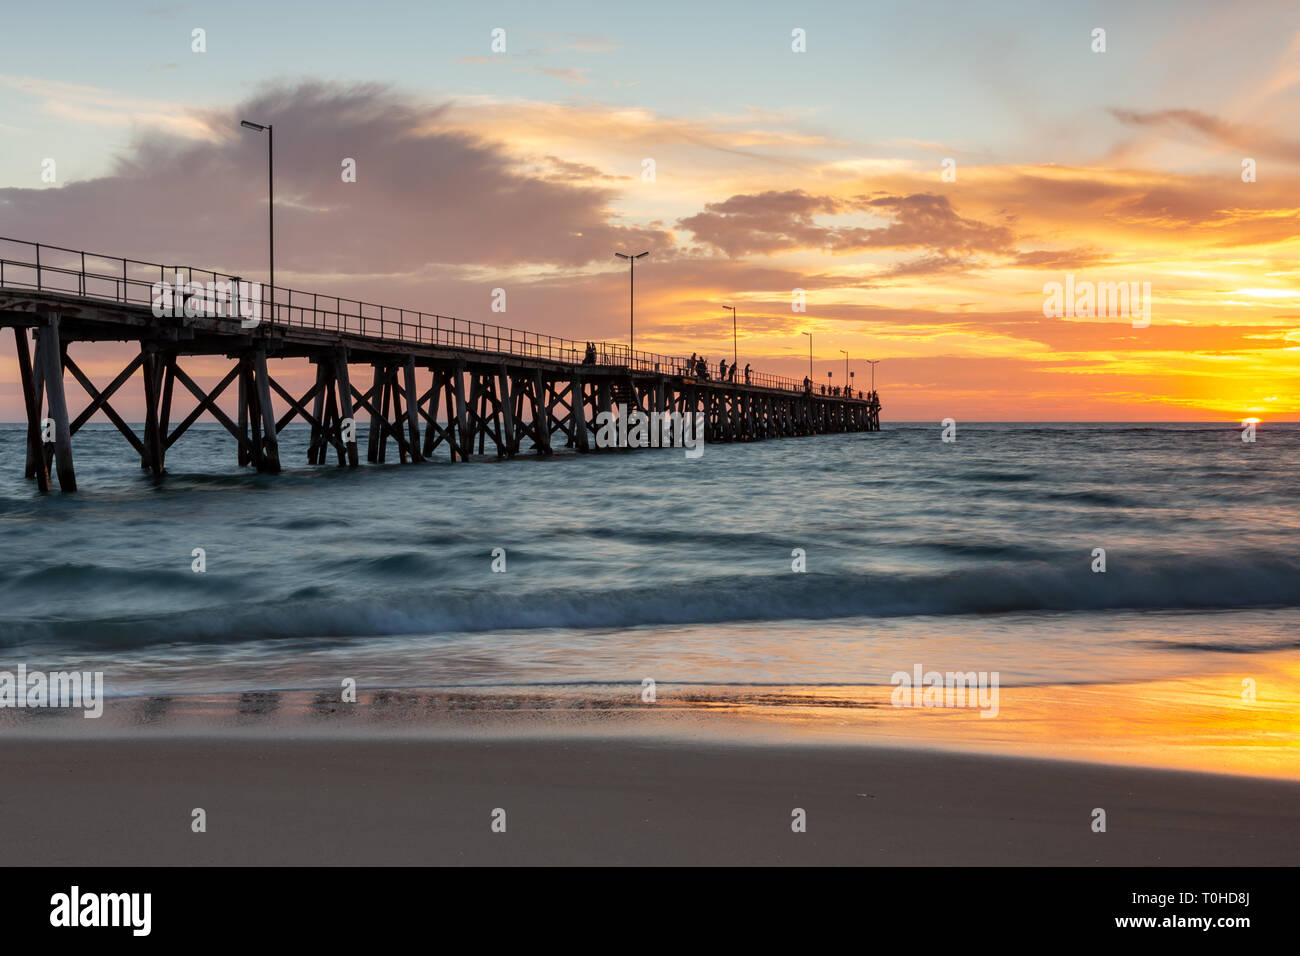 A beautiful sunset at Port Noarlunga with the jetty and motion blur on the water at Port Noarlunga South Australia Stock Photo